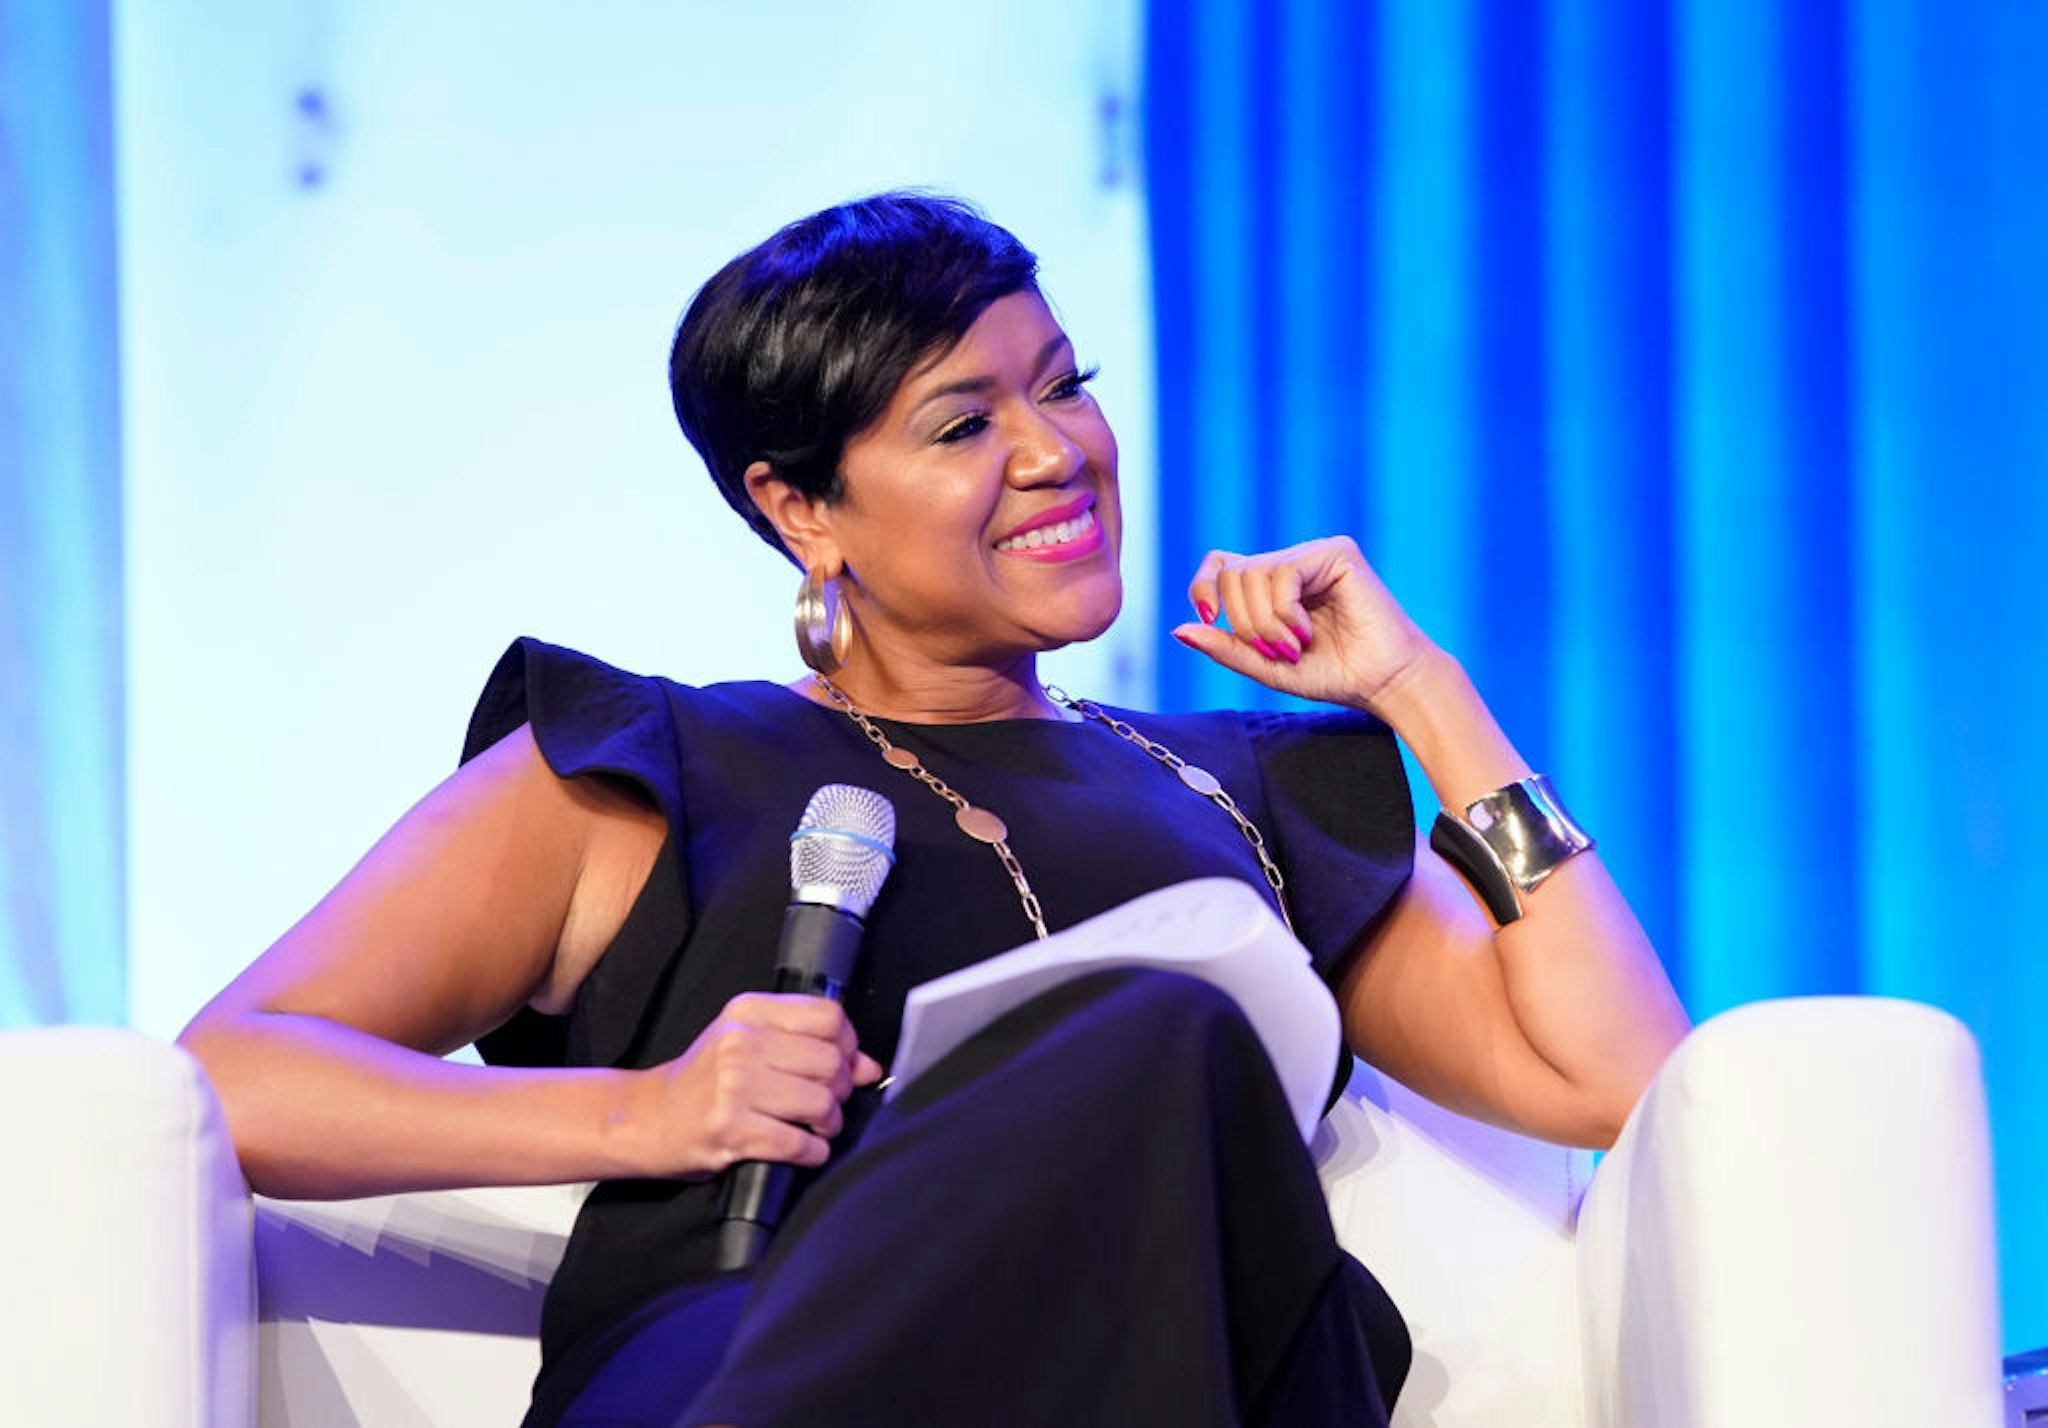 AUSTIN, TEXAS - OCTOBER 24: Tiffany D. Cross of The Beat DC speaks on stage during Texas Conference For Women 2019 at Austin Convention Center on October 24, 2019 in Austin, Texas. (Photo by Marla Aufmuth/Getty Images for Texas Conference for Women 2019)